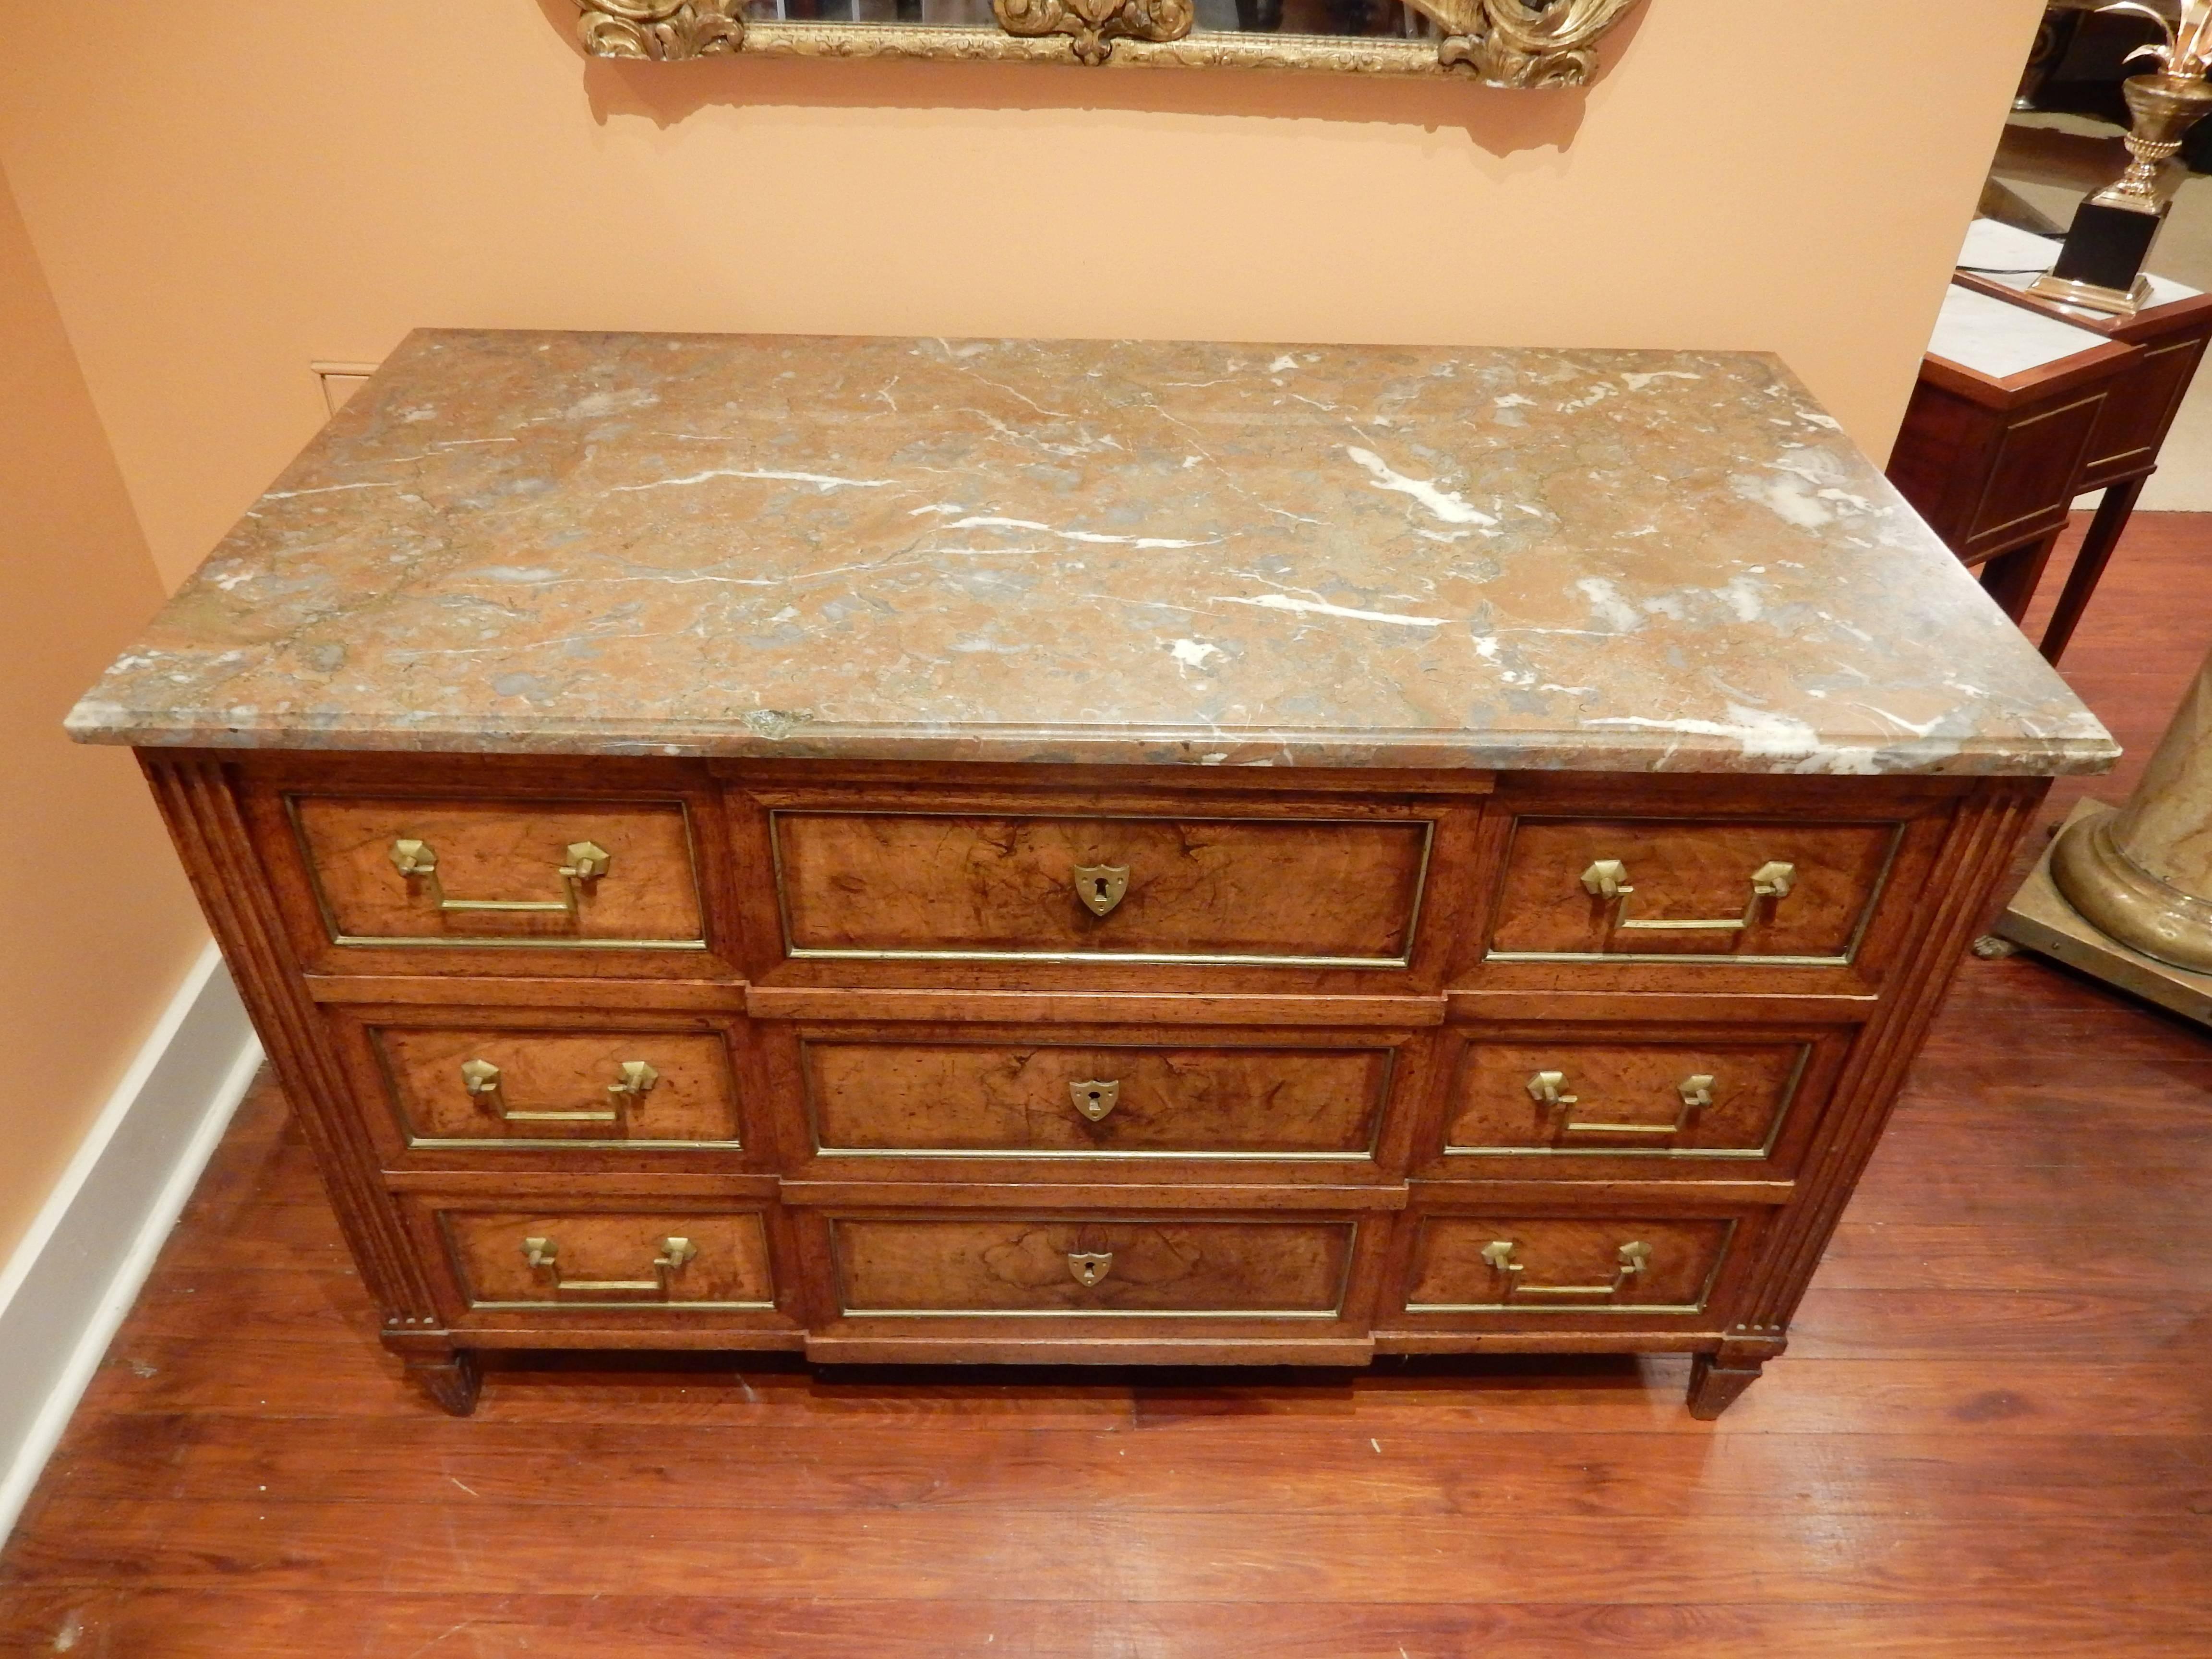 Beautiful walnut Louis XVI three-drawer commode with marble top and brass trim on drawers. Very nice warm patina.